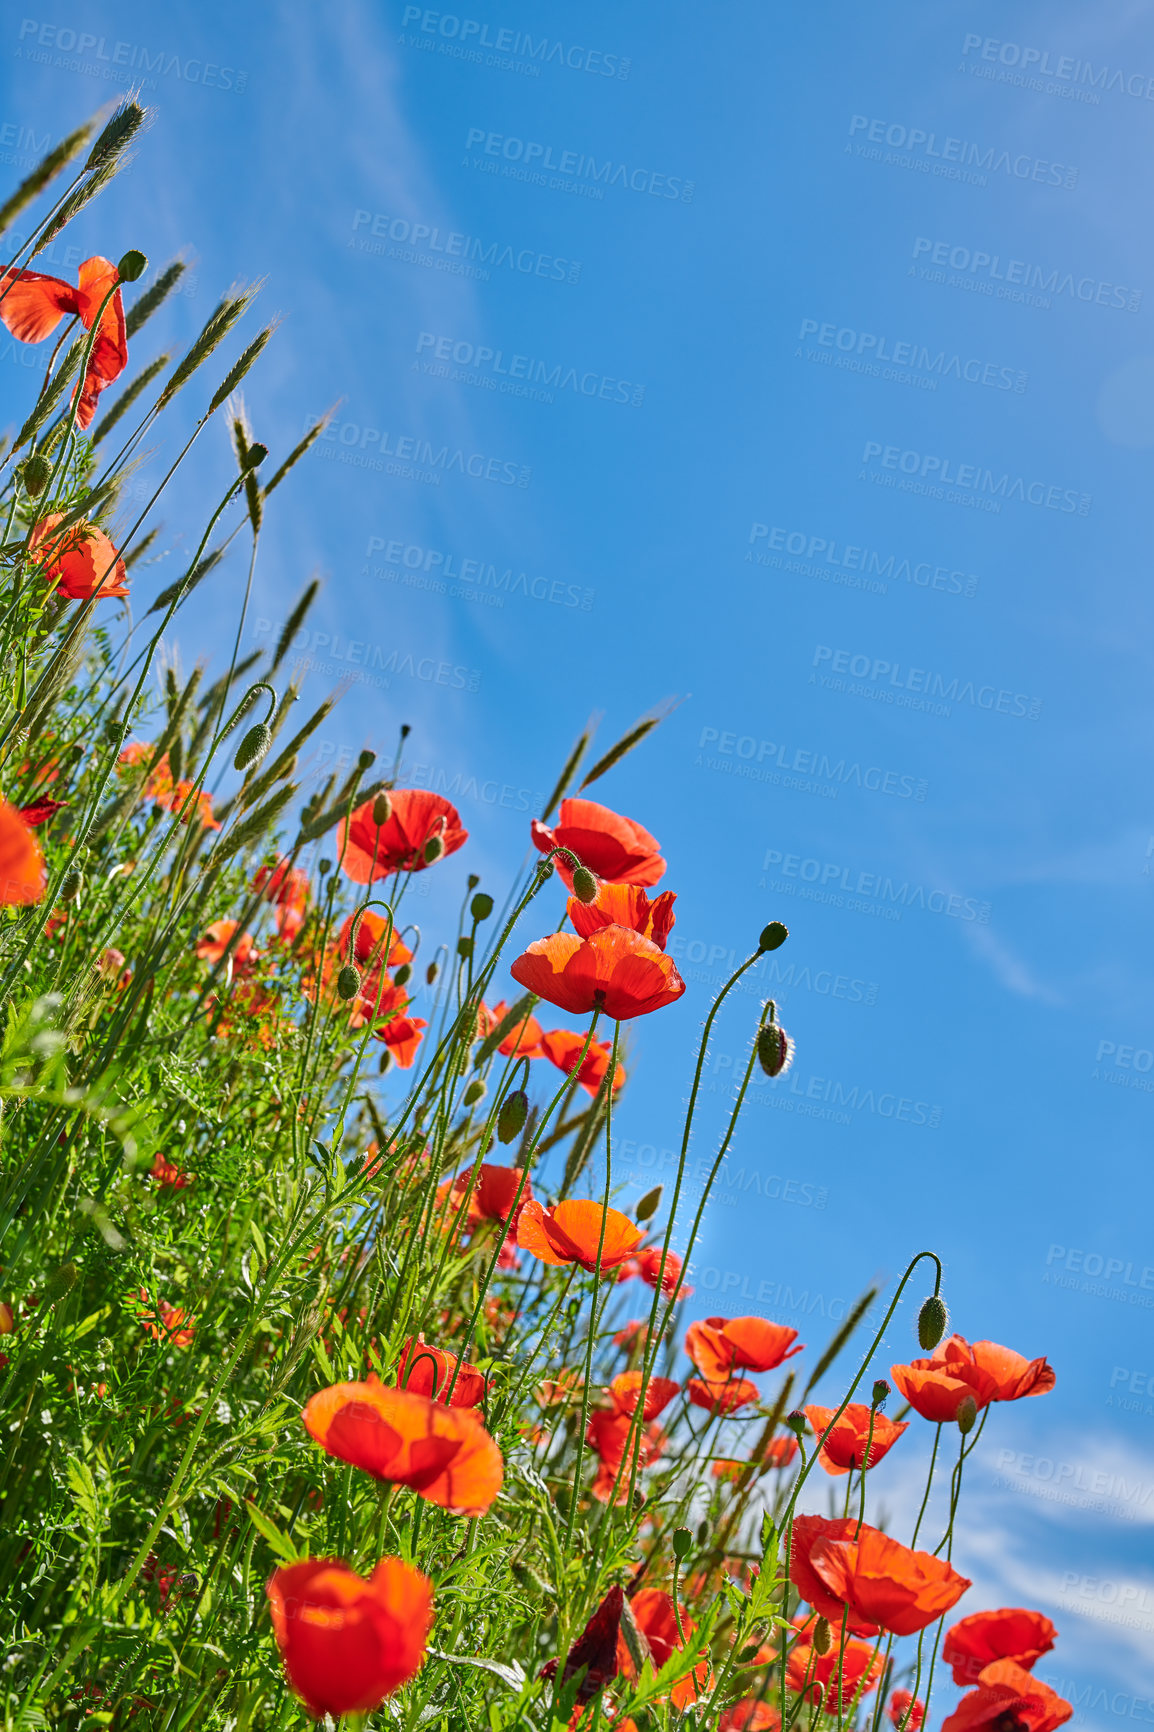 Buy stock photo A photo of poppies in the countryside in early summer - Denmark